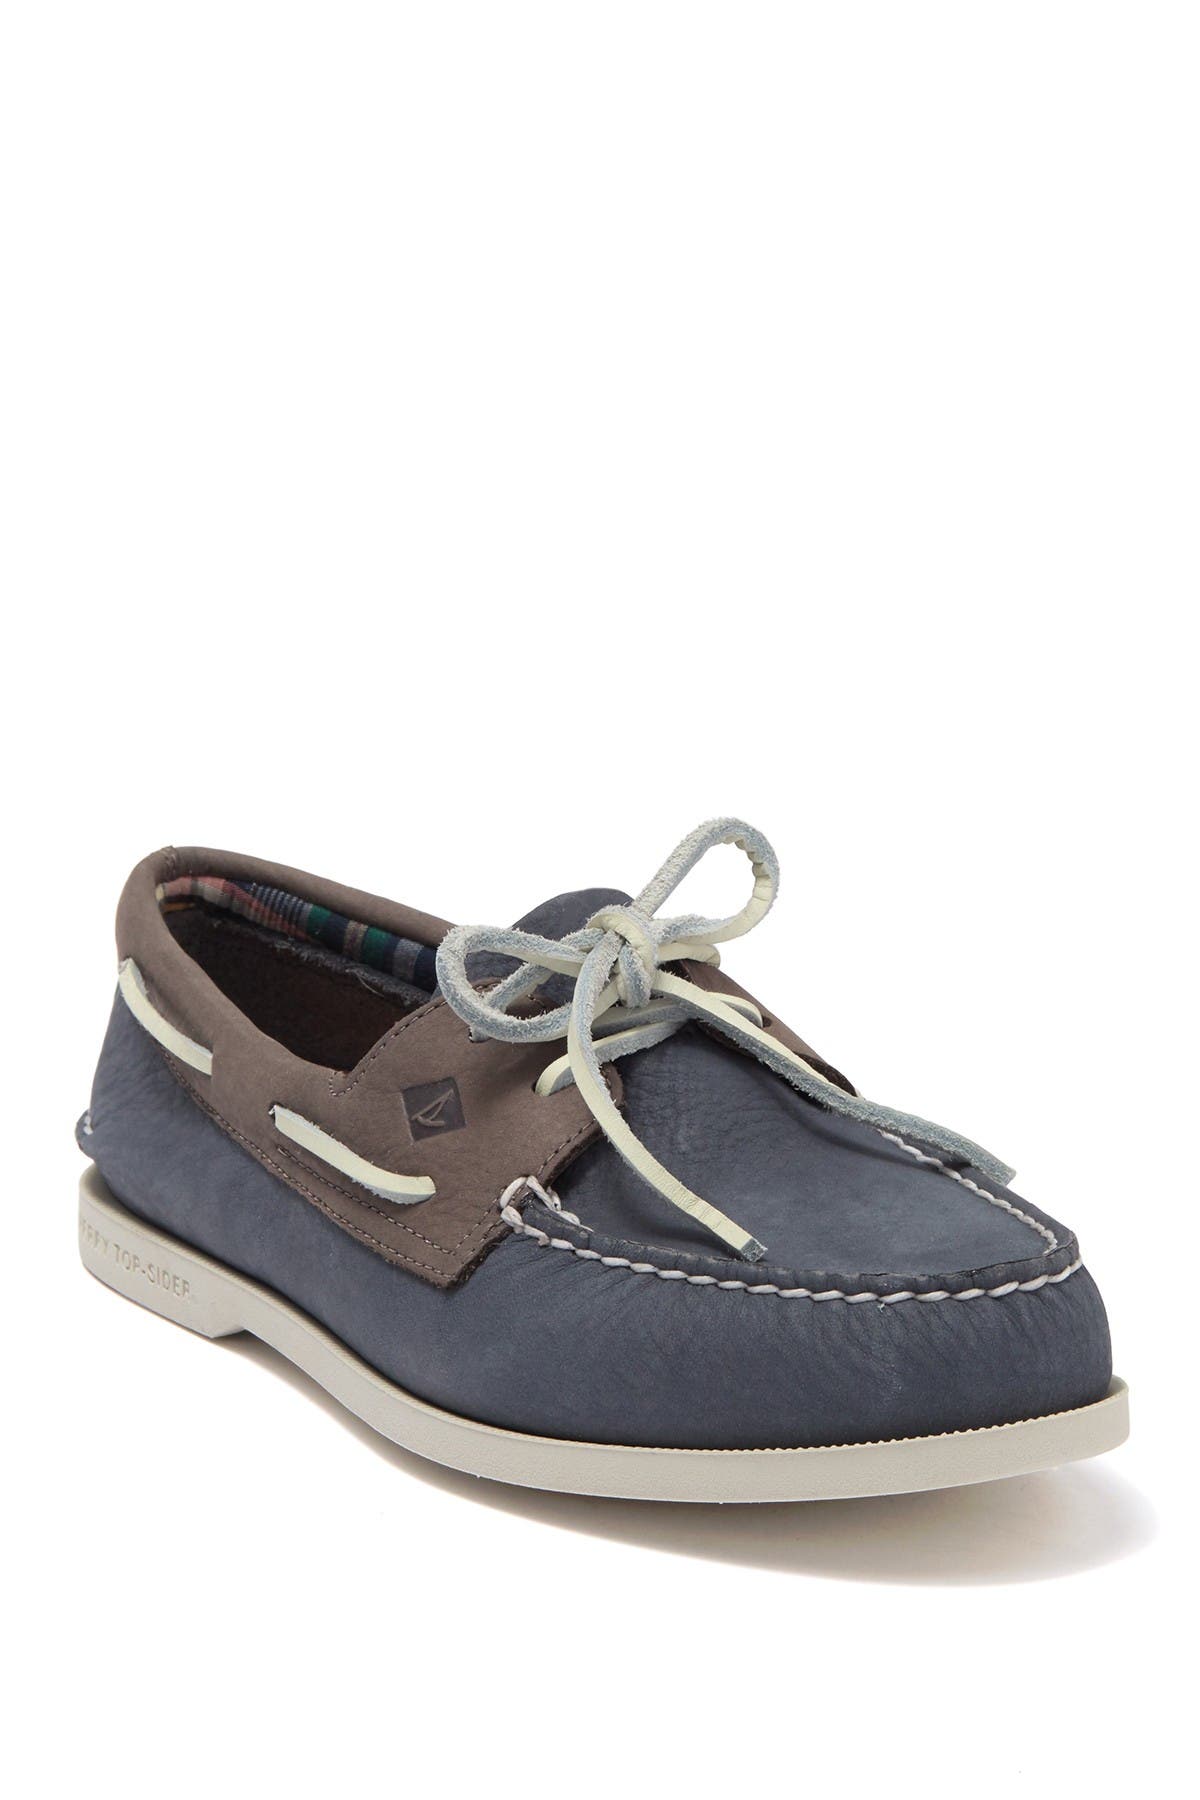 sperry washable boat shoe